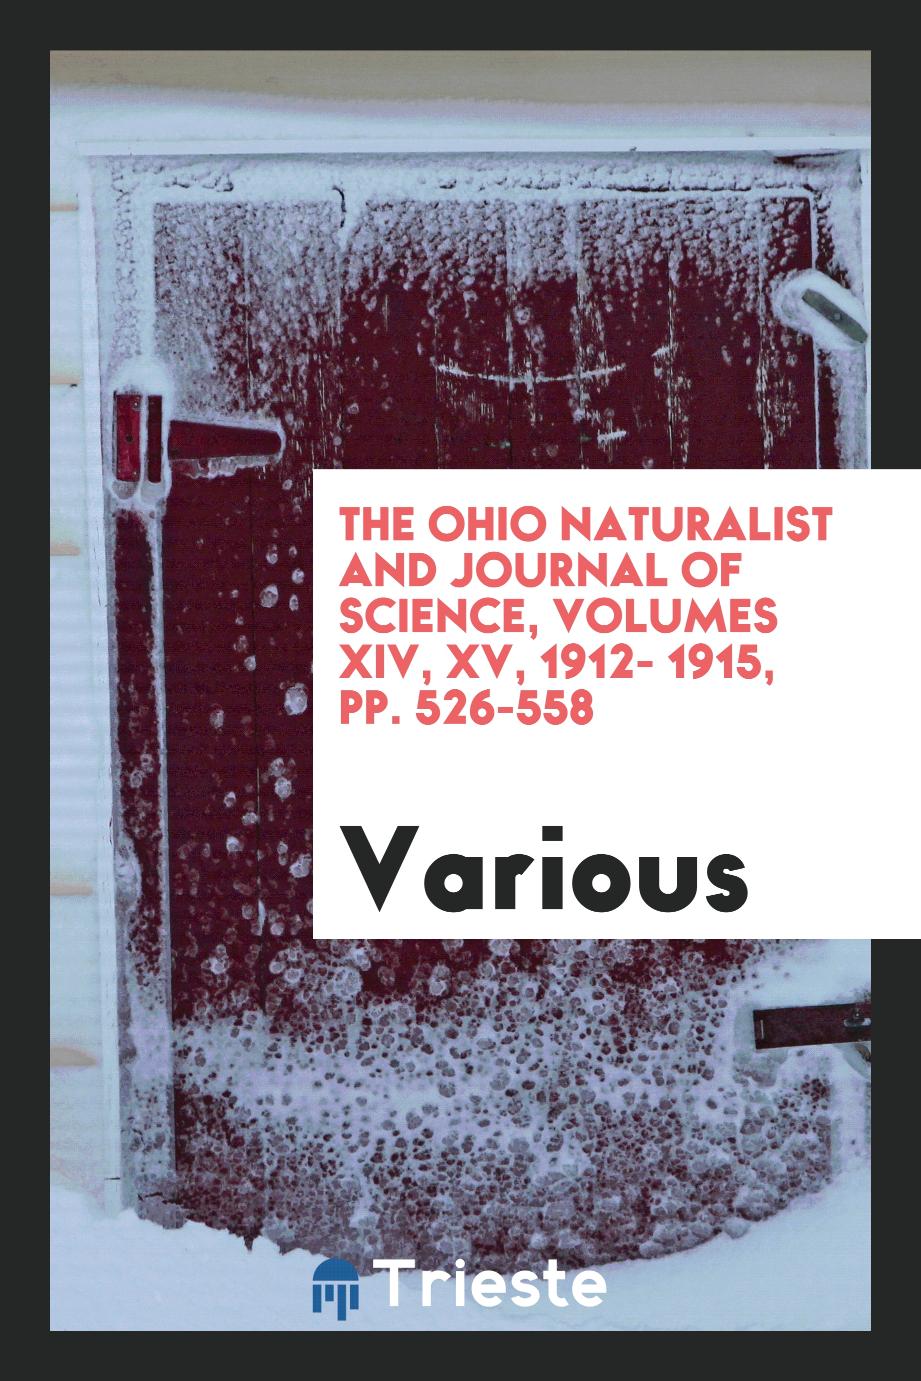 The Ohio naturalist and journal of science, Volumes XIV, XV, 1912- 1915, pp. 526-558